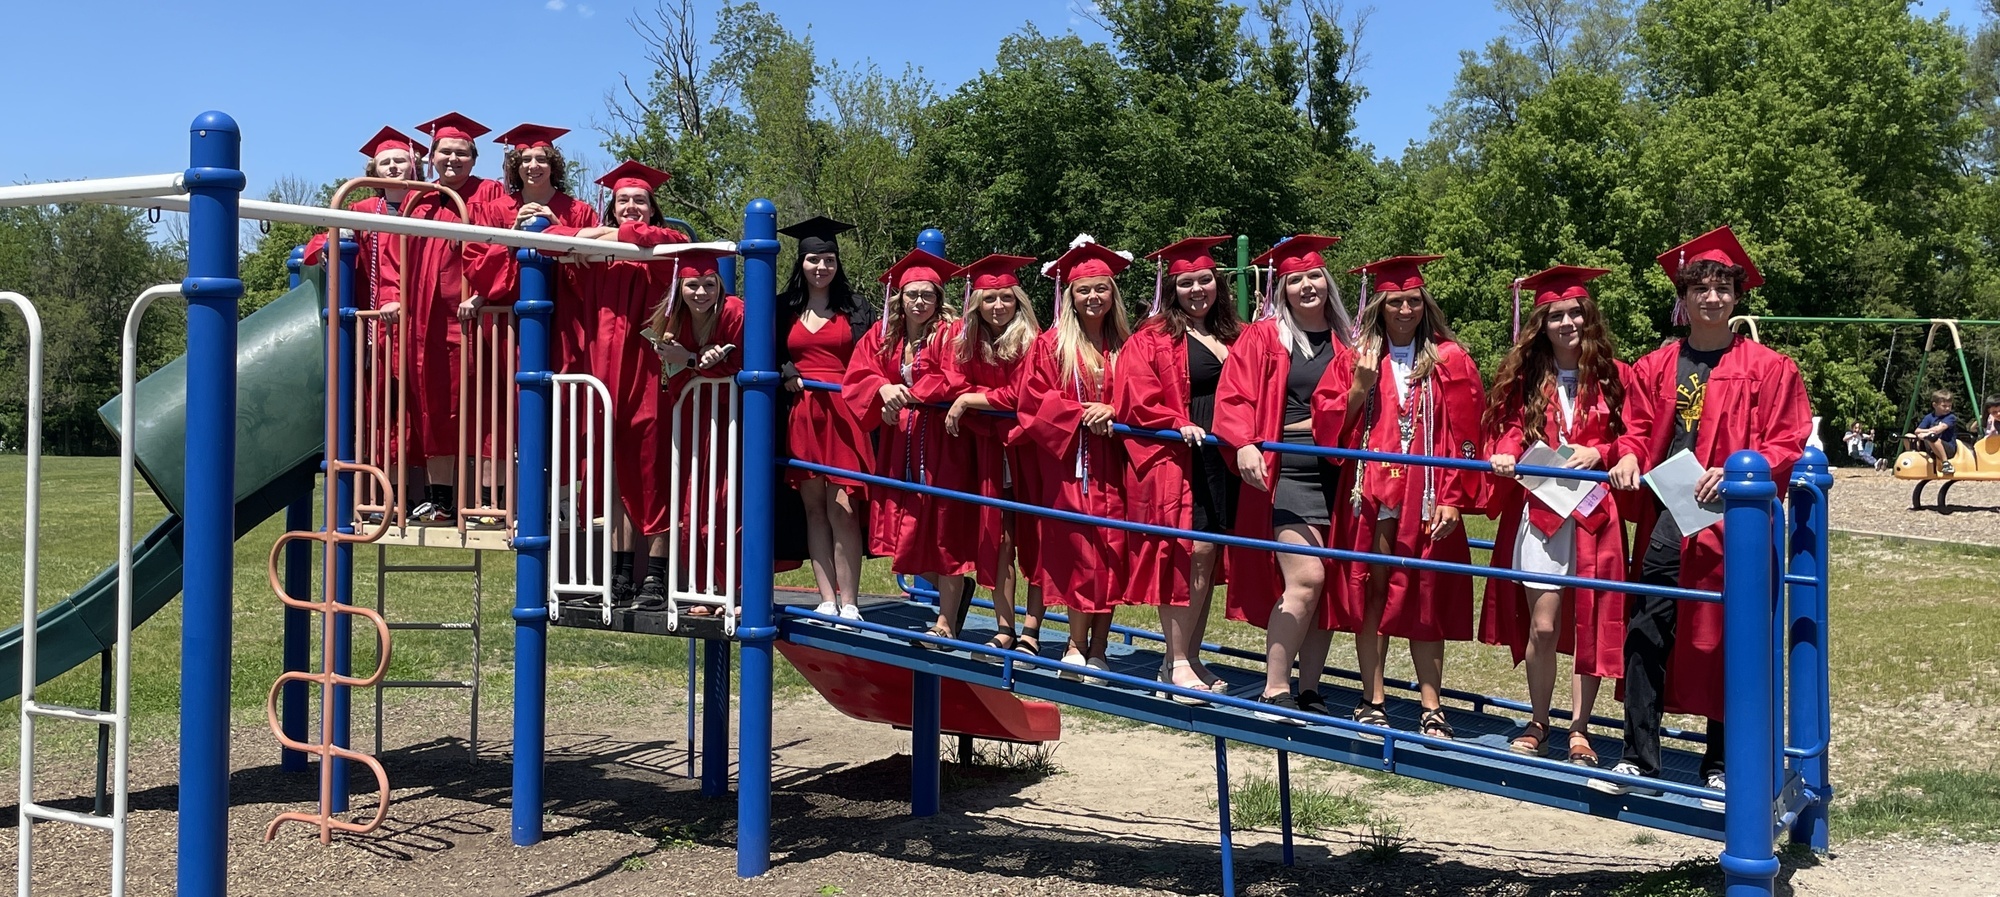 Group of Graduating Senior former Holly El students together on the playground equipment